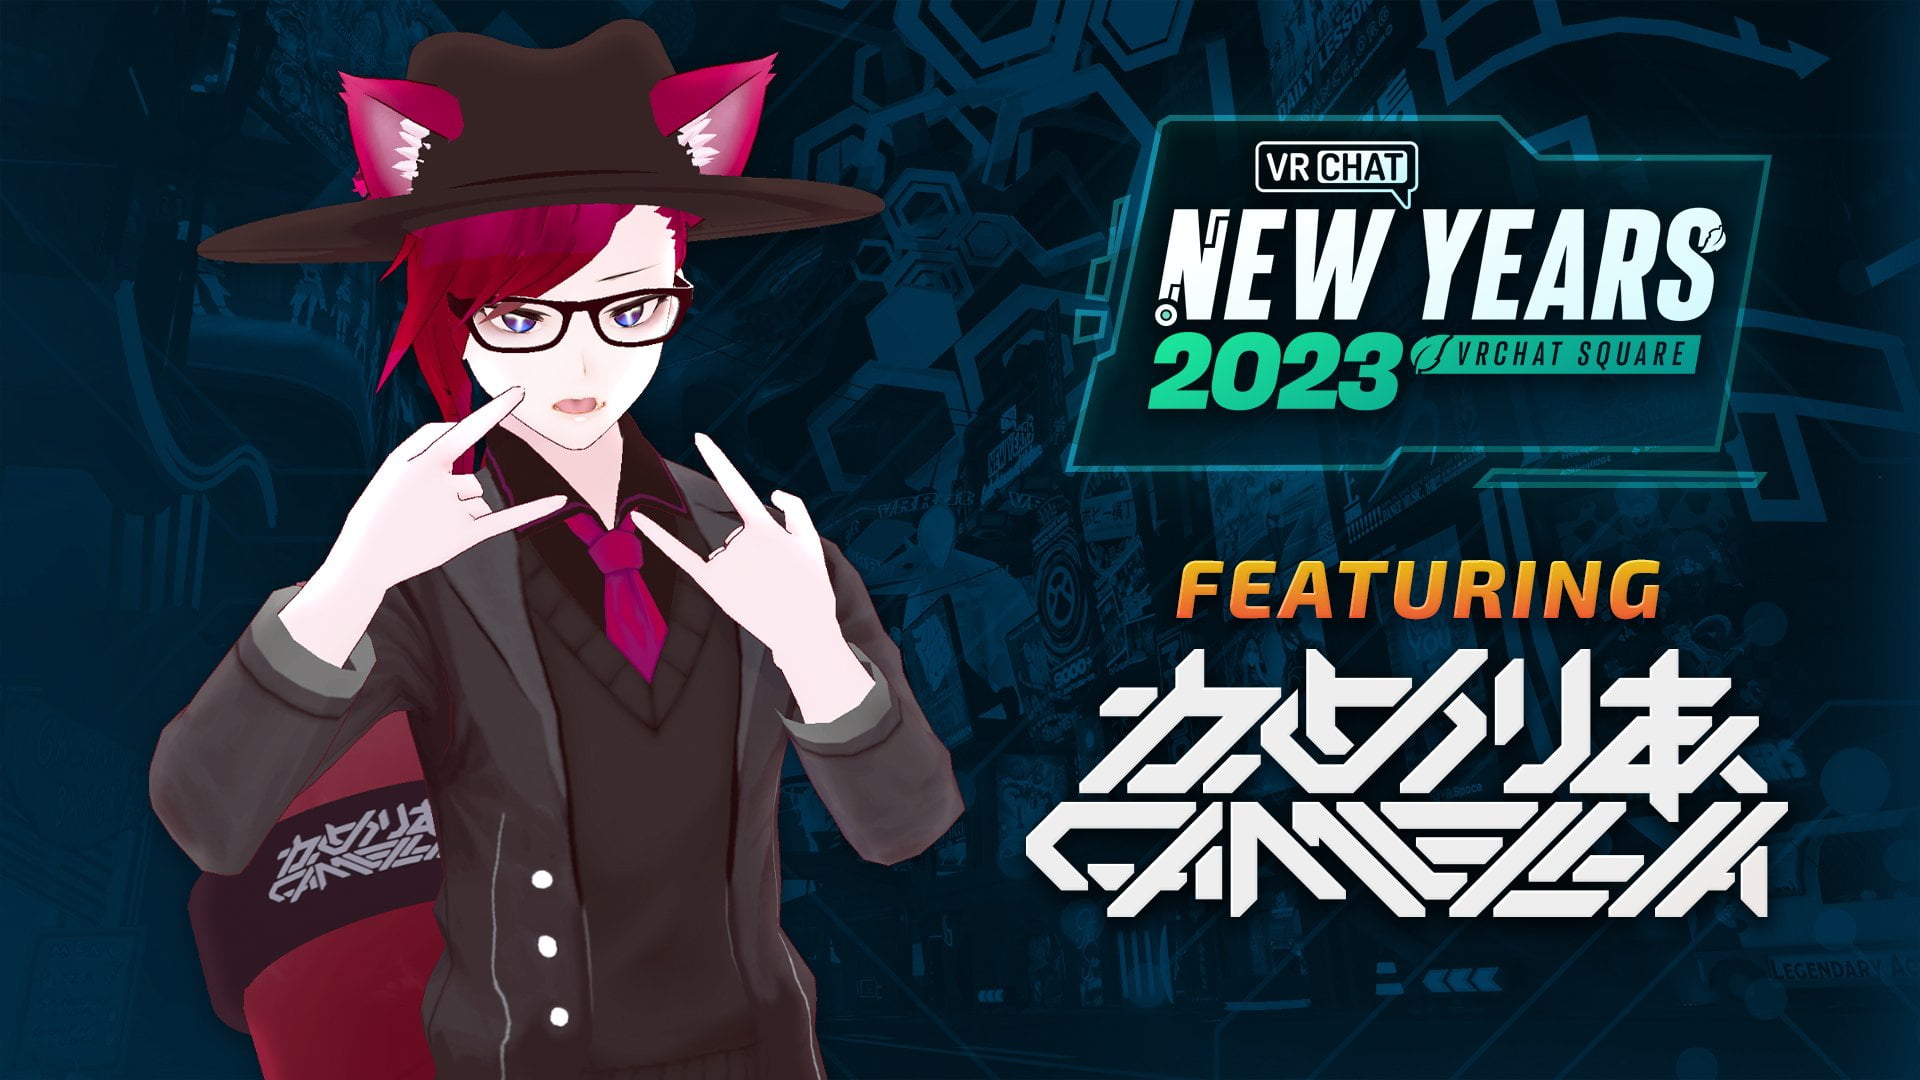 VRChat’s New Year’s Eve party is probably the most metaverse-like event of the year